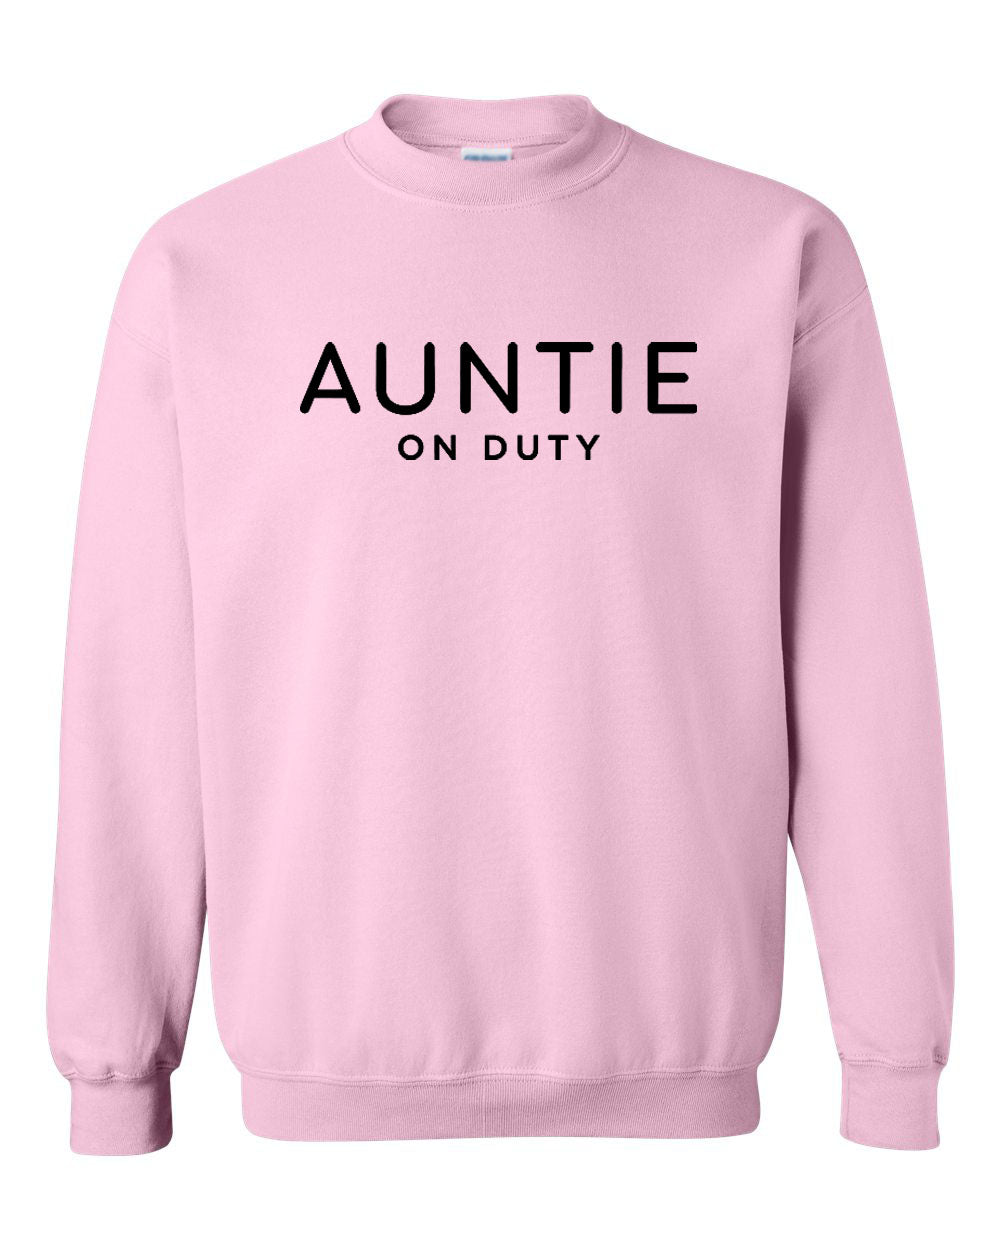 Auntie On Duty Soft Life Collection Light Pink Sweatshirt